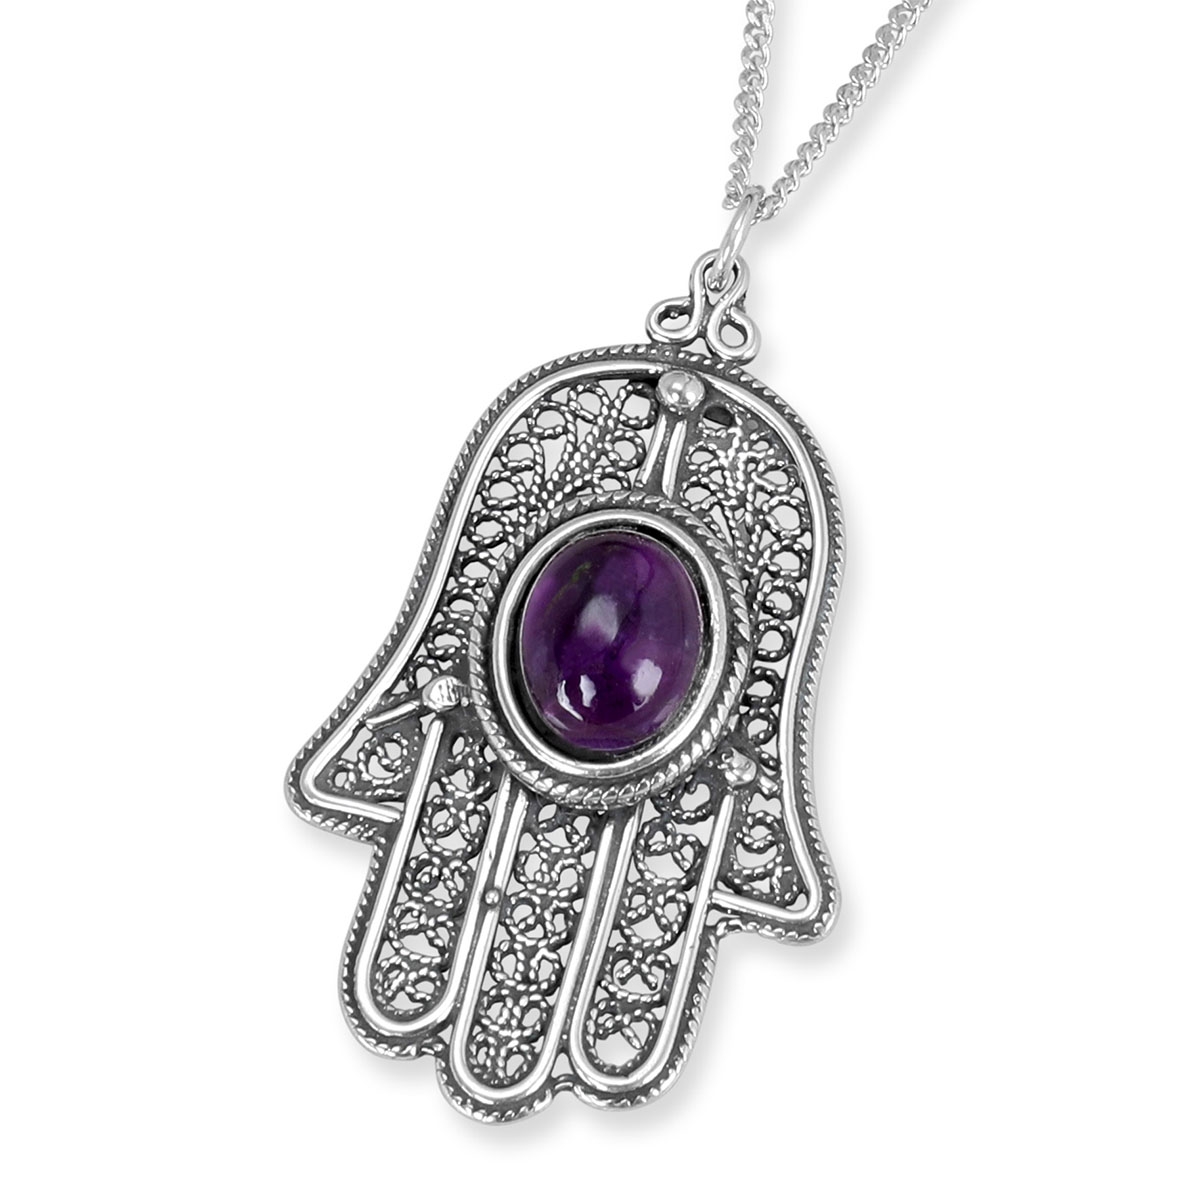 Traditional Yemenite Art Handcrafted Sterling Silver and Amethyst Hamsa Necklace With Rope Design - 1